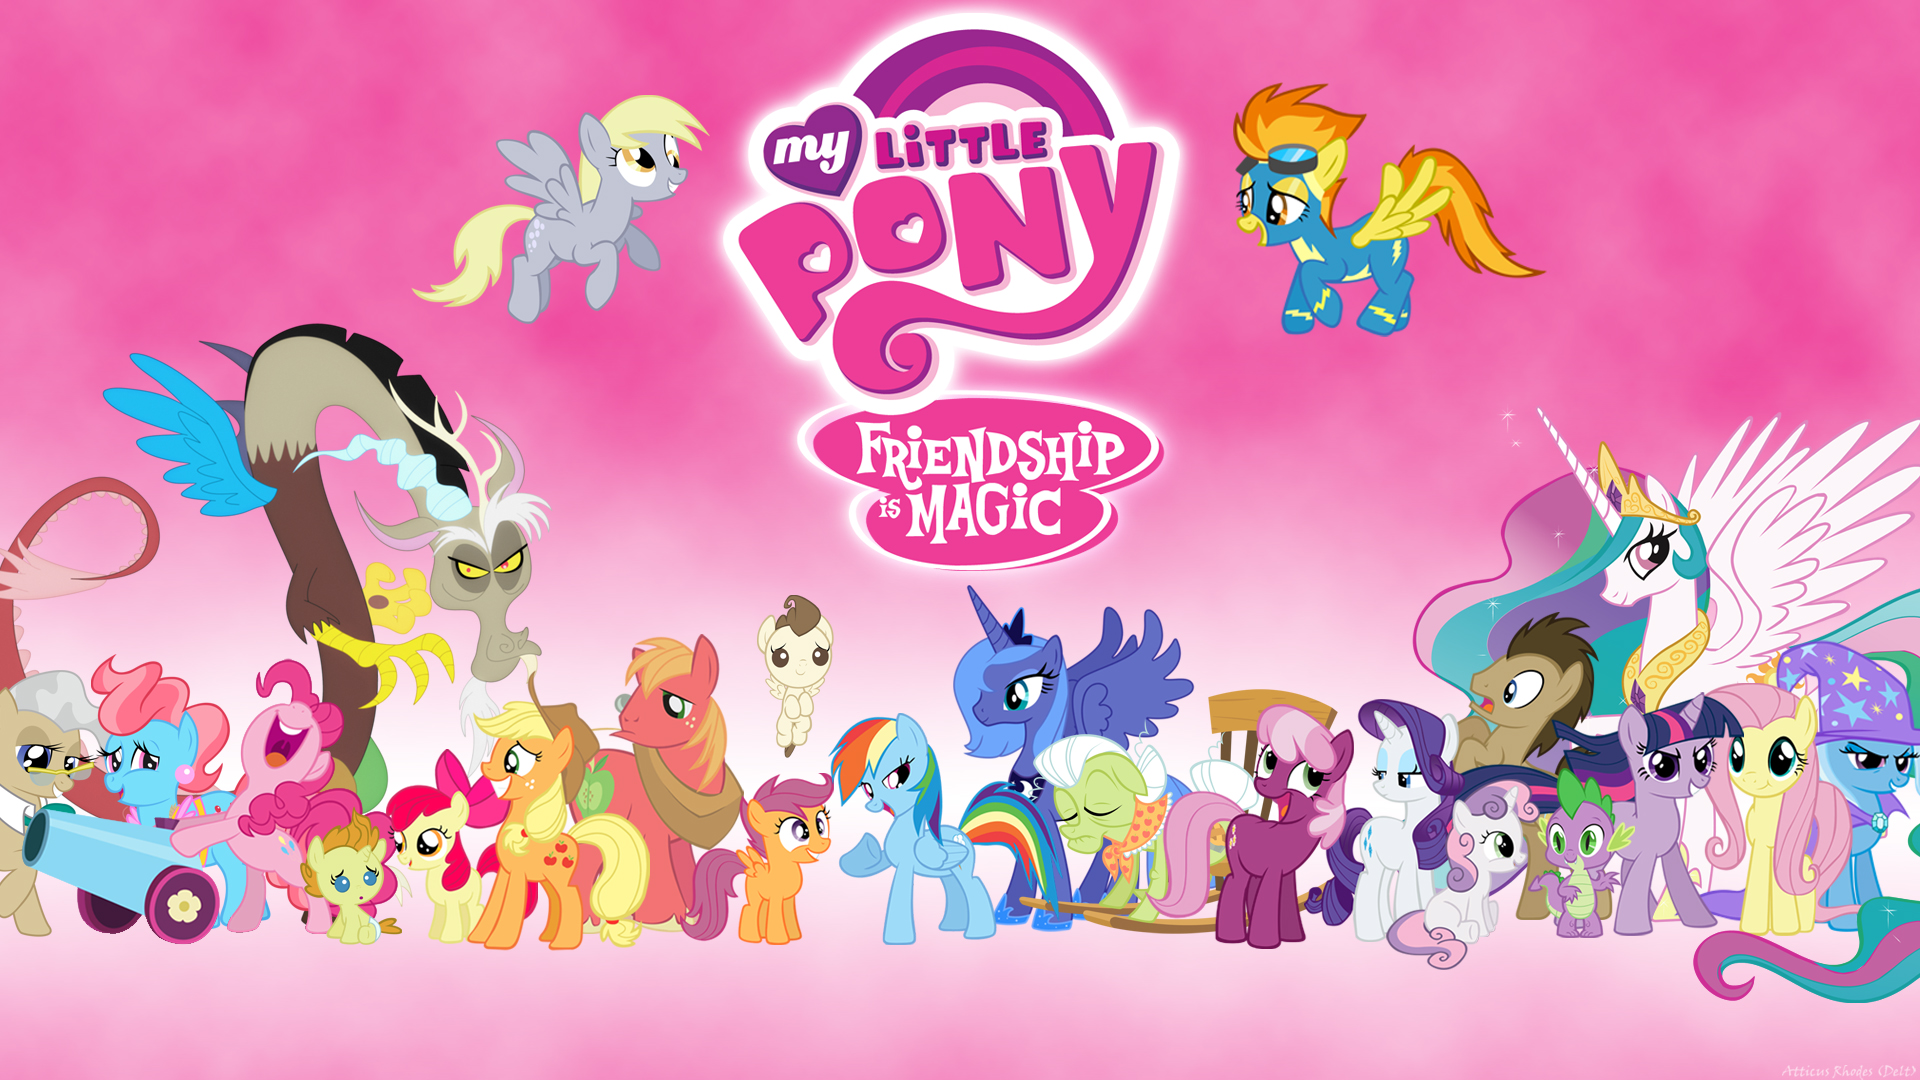 My Little Pony “Friendship is Magic” Gets Renewed for a Fifth Season